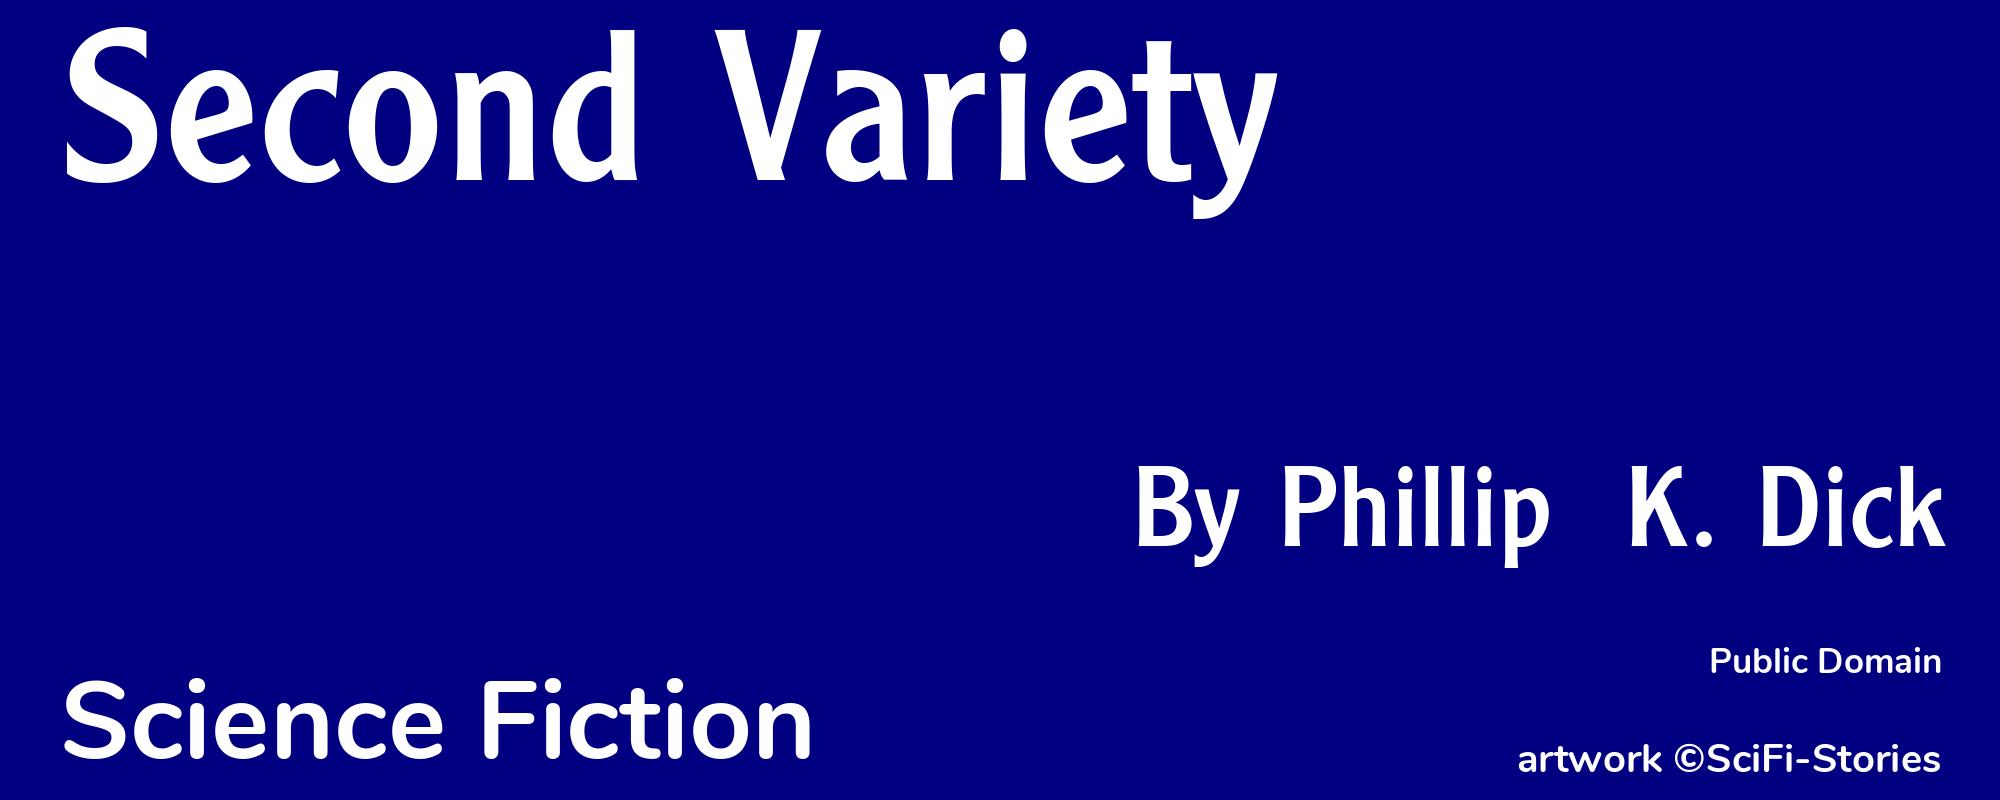 Second Variety - Cover